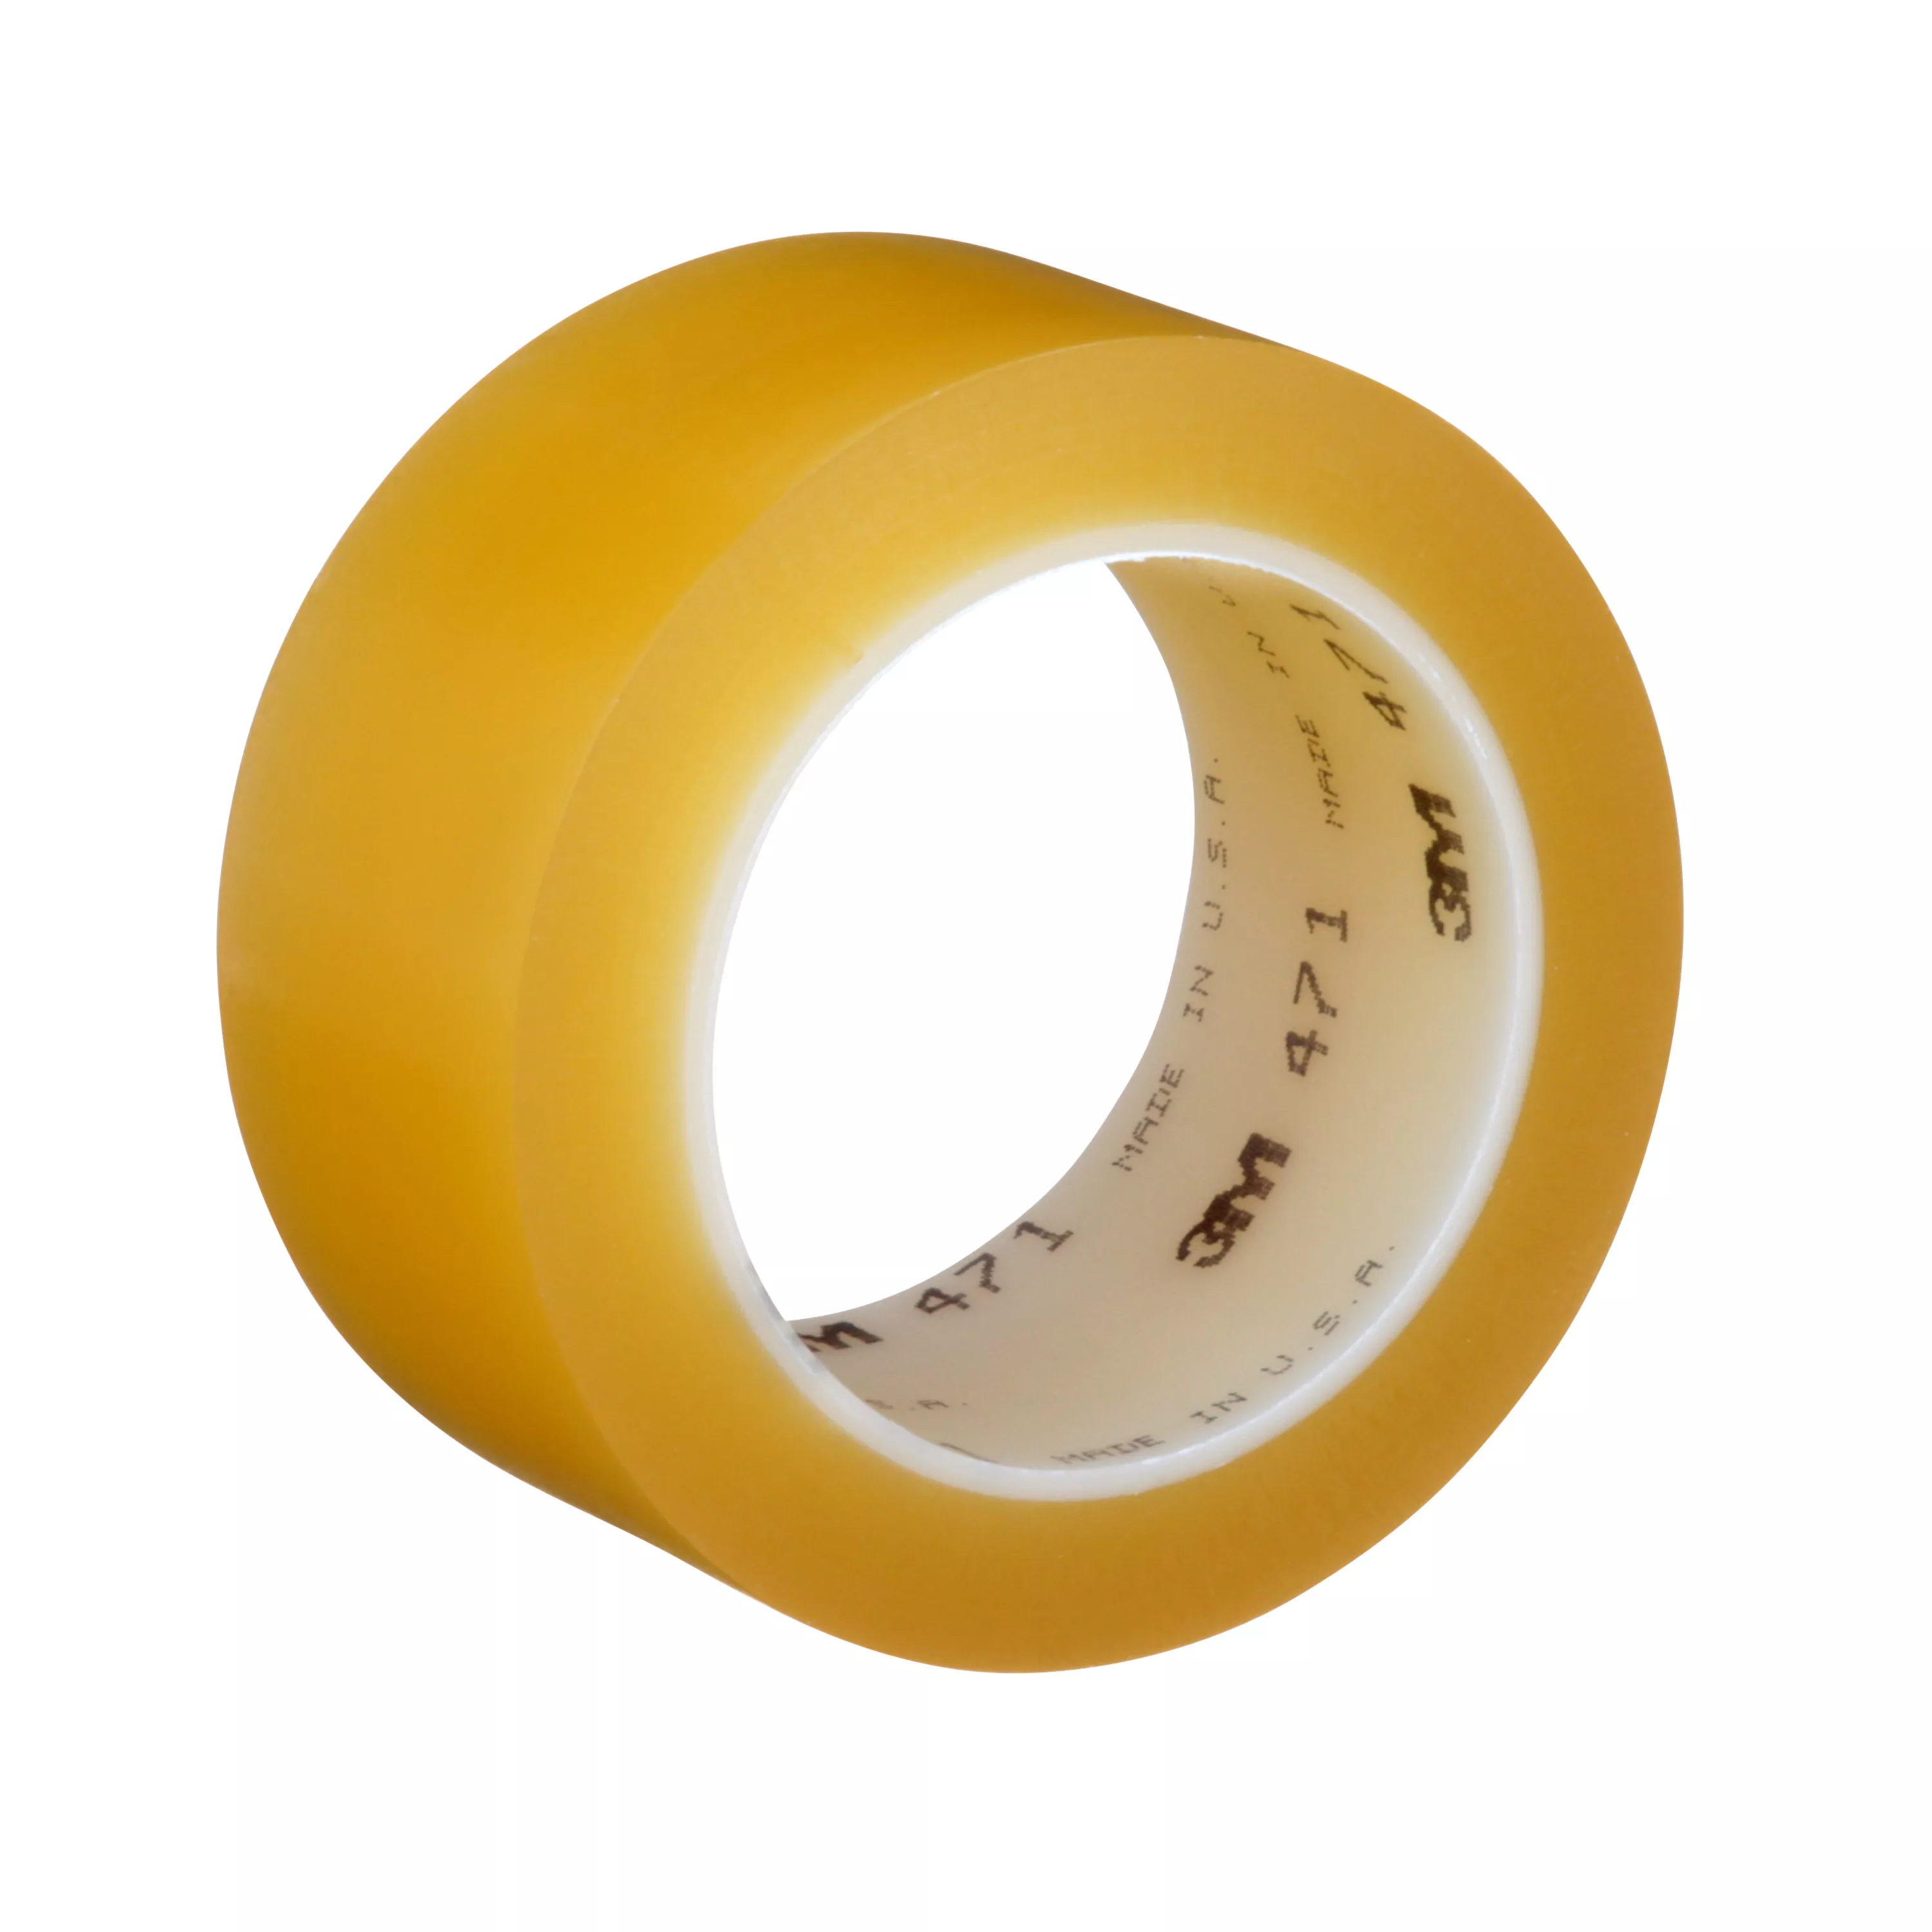 3M™ Vinyl Tape 471, Transparent, 2 in x 36 yd, 5.2 mil, 24 Roll/Case,
Individually Wrapped Conveniently Packaged